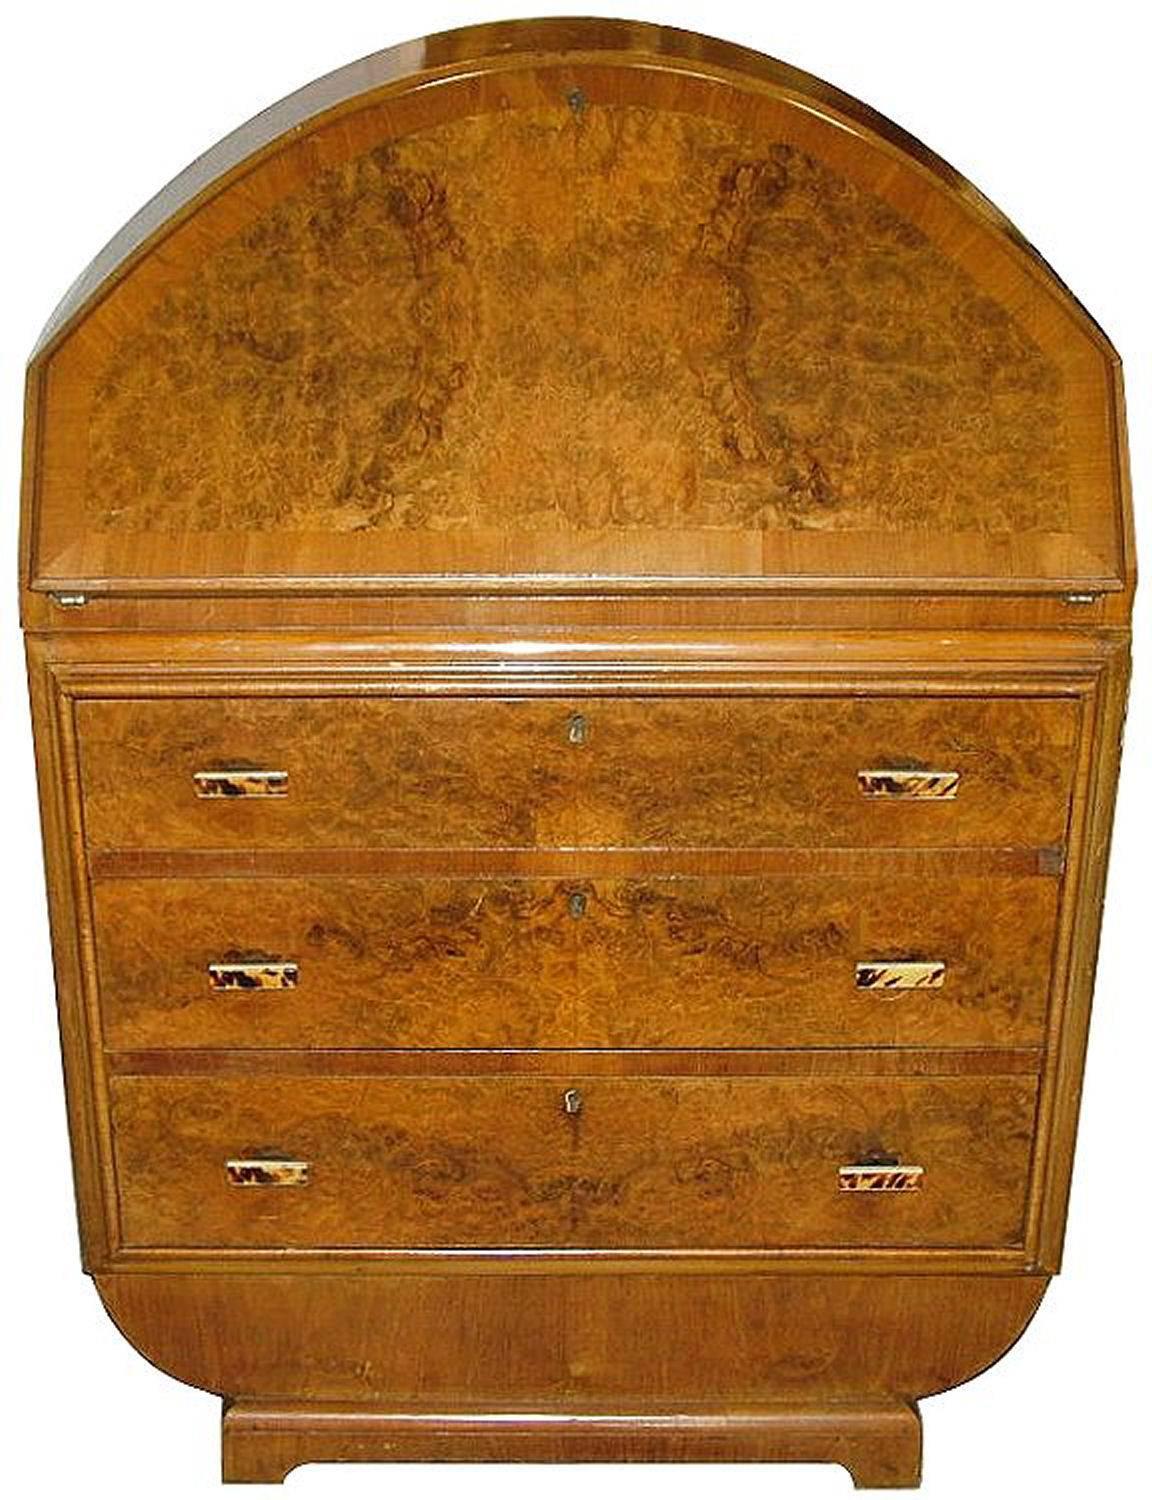 Fabulous 1930s Art Deco blonde walnut bureau in the most wonderful shape. Not only does this great bureau look great its very functional too. The top opens up to reveal everything you need to rest a laptop or write a letter (does anyone do that